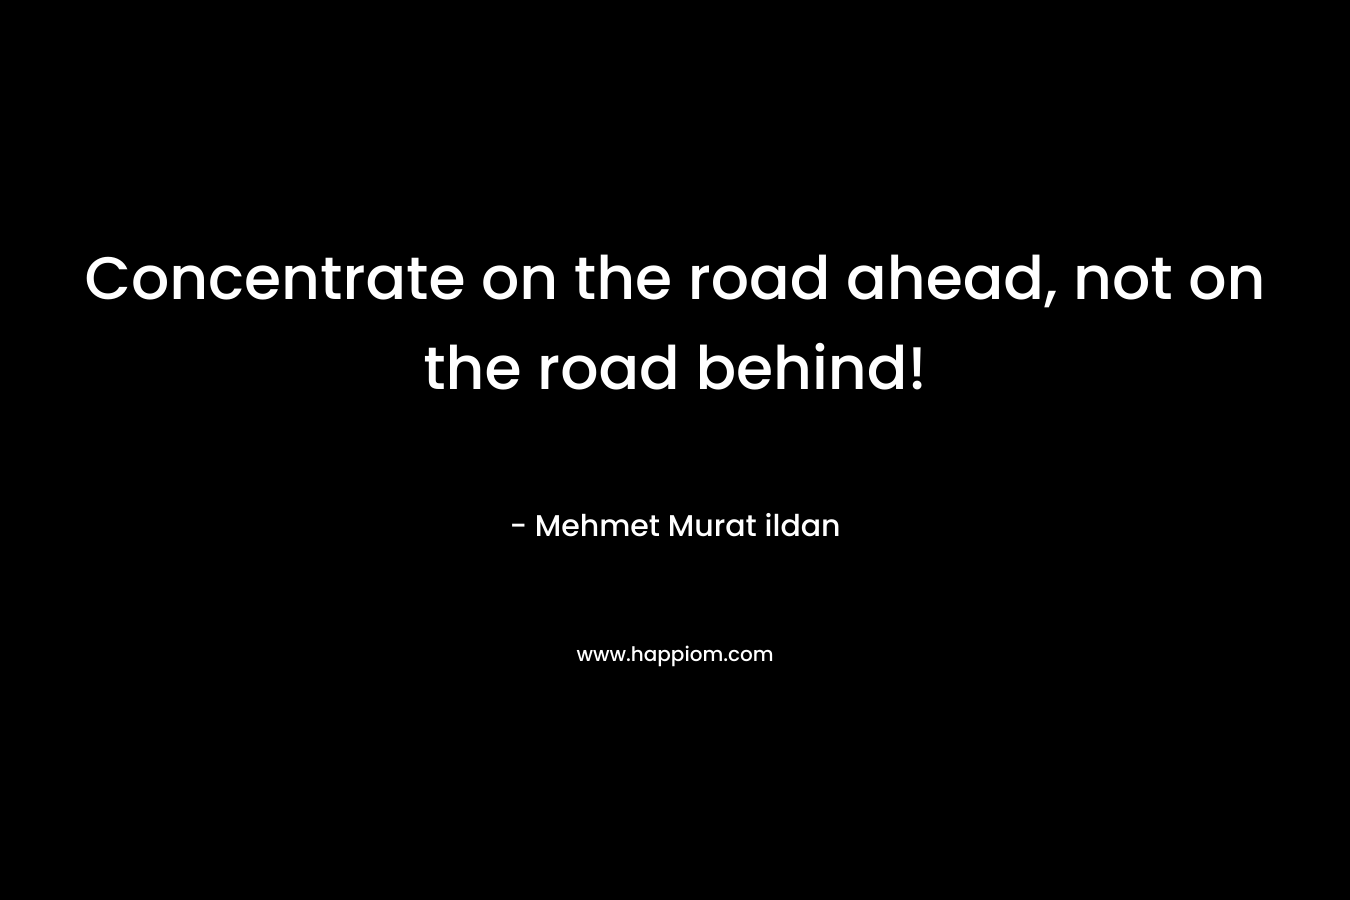 Concentrate on the road ahead, not on the road behind!